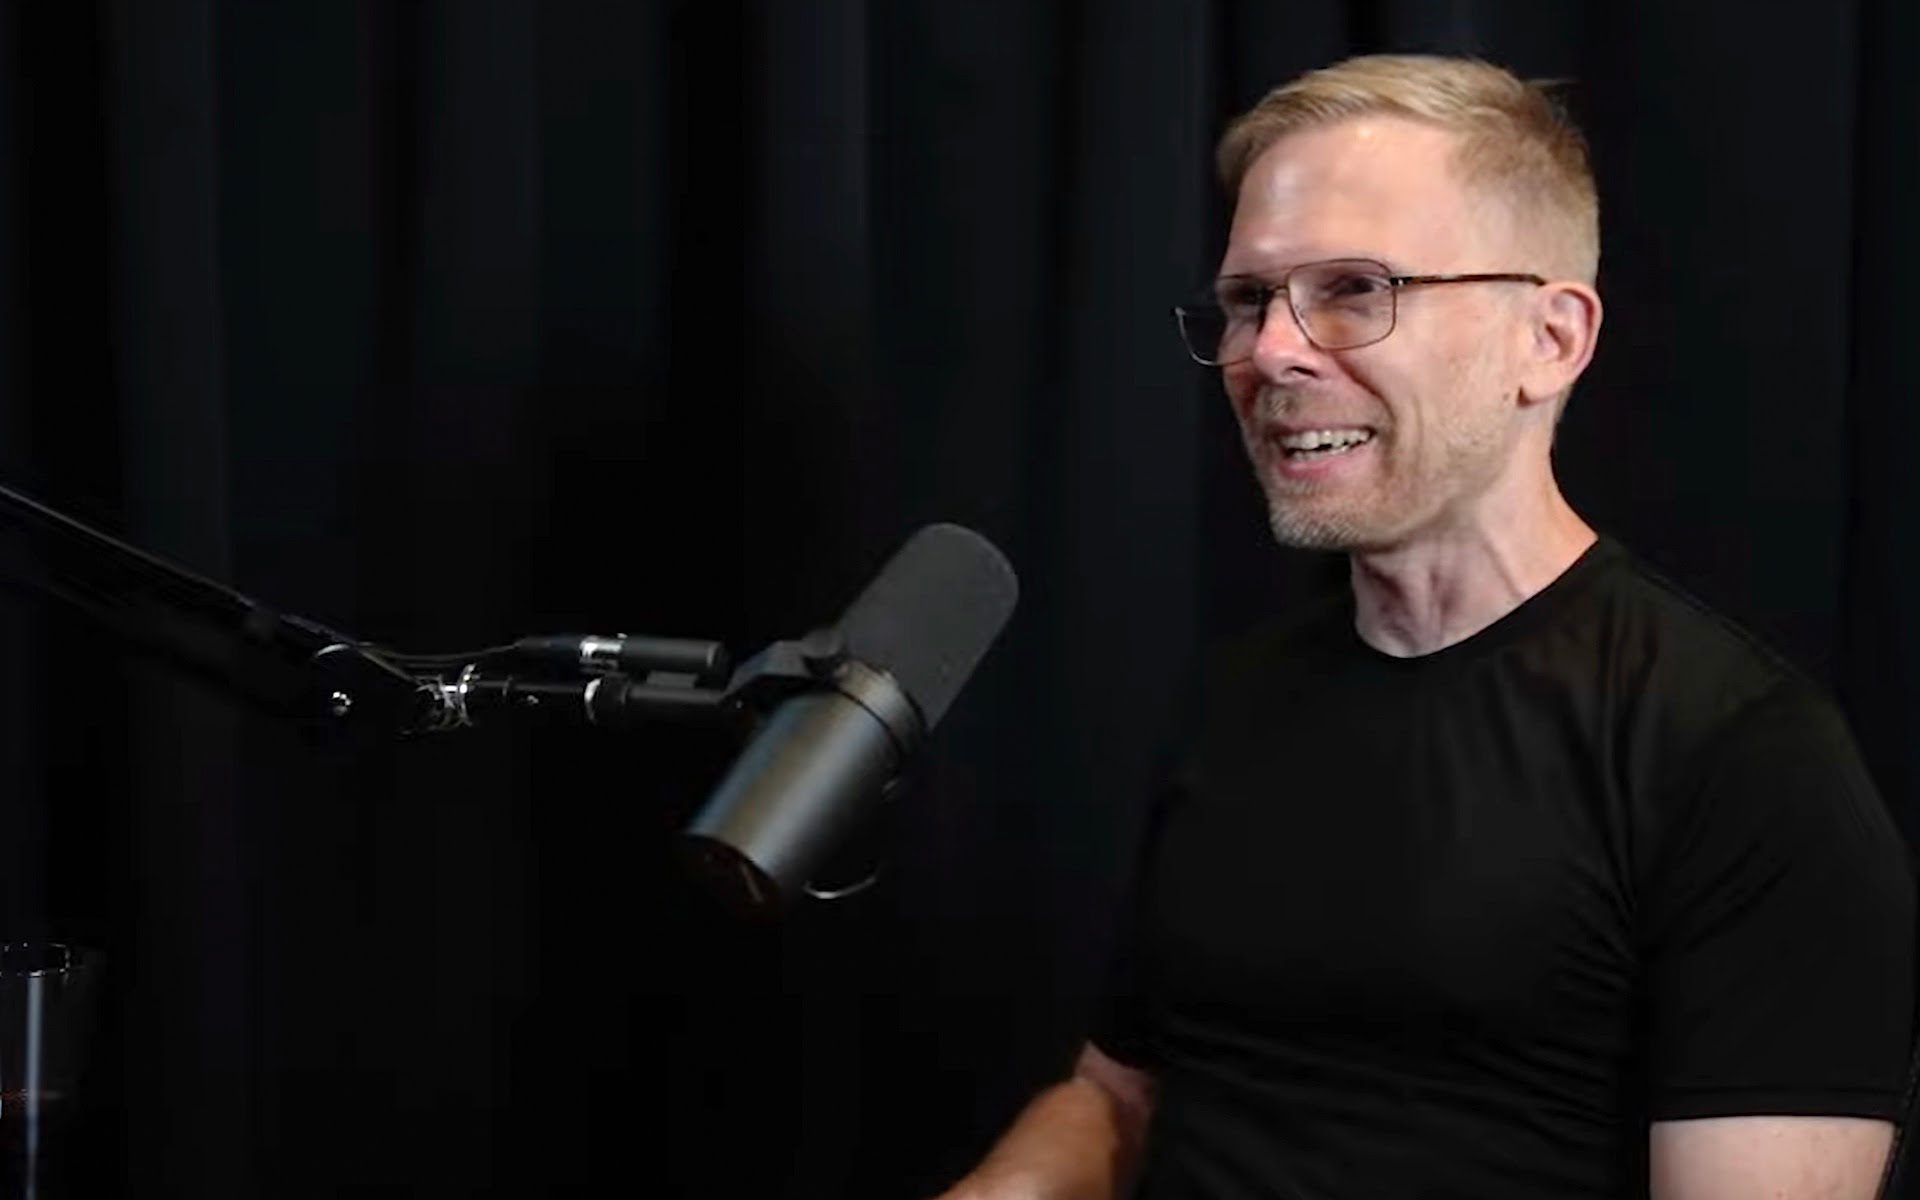 For John Carmack, VR doesn’t need better hardware to succeed